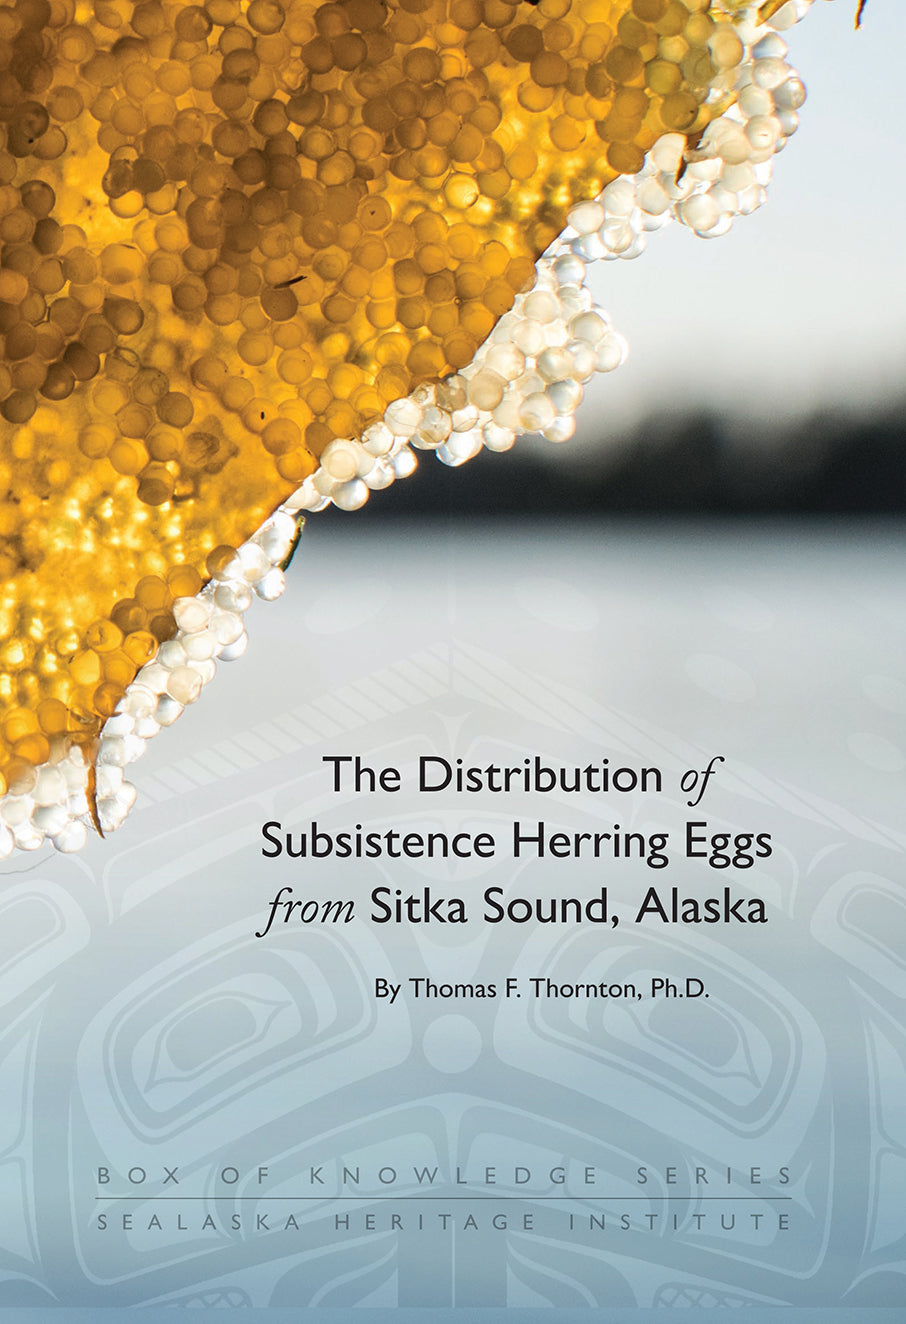 Book, BOK - “The Distribution of Subsistence Herring Eggs from Sitka Sound, Alaska"